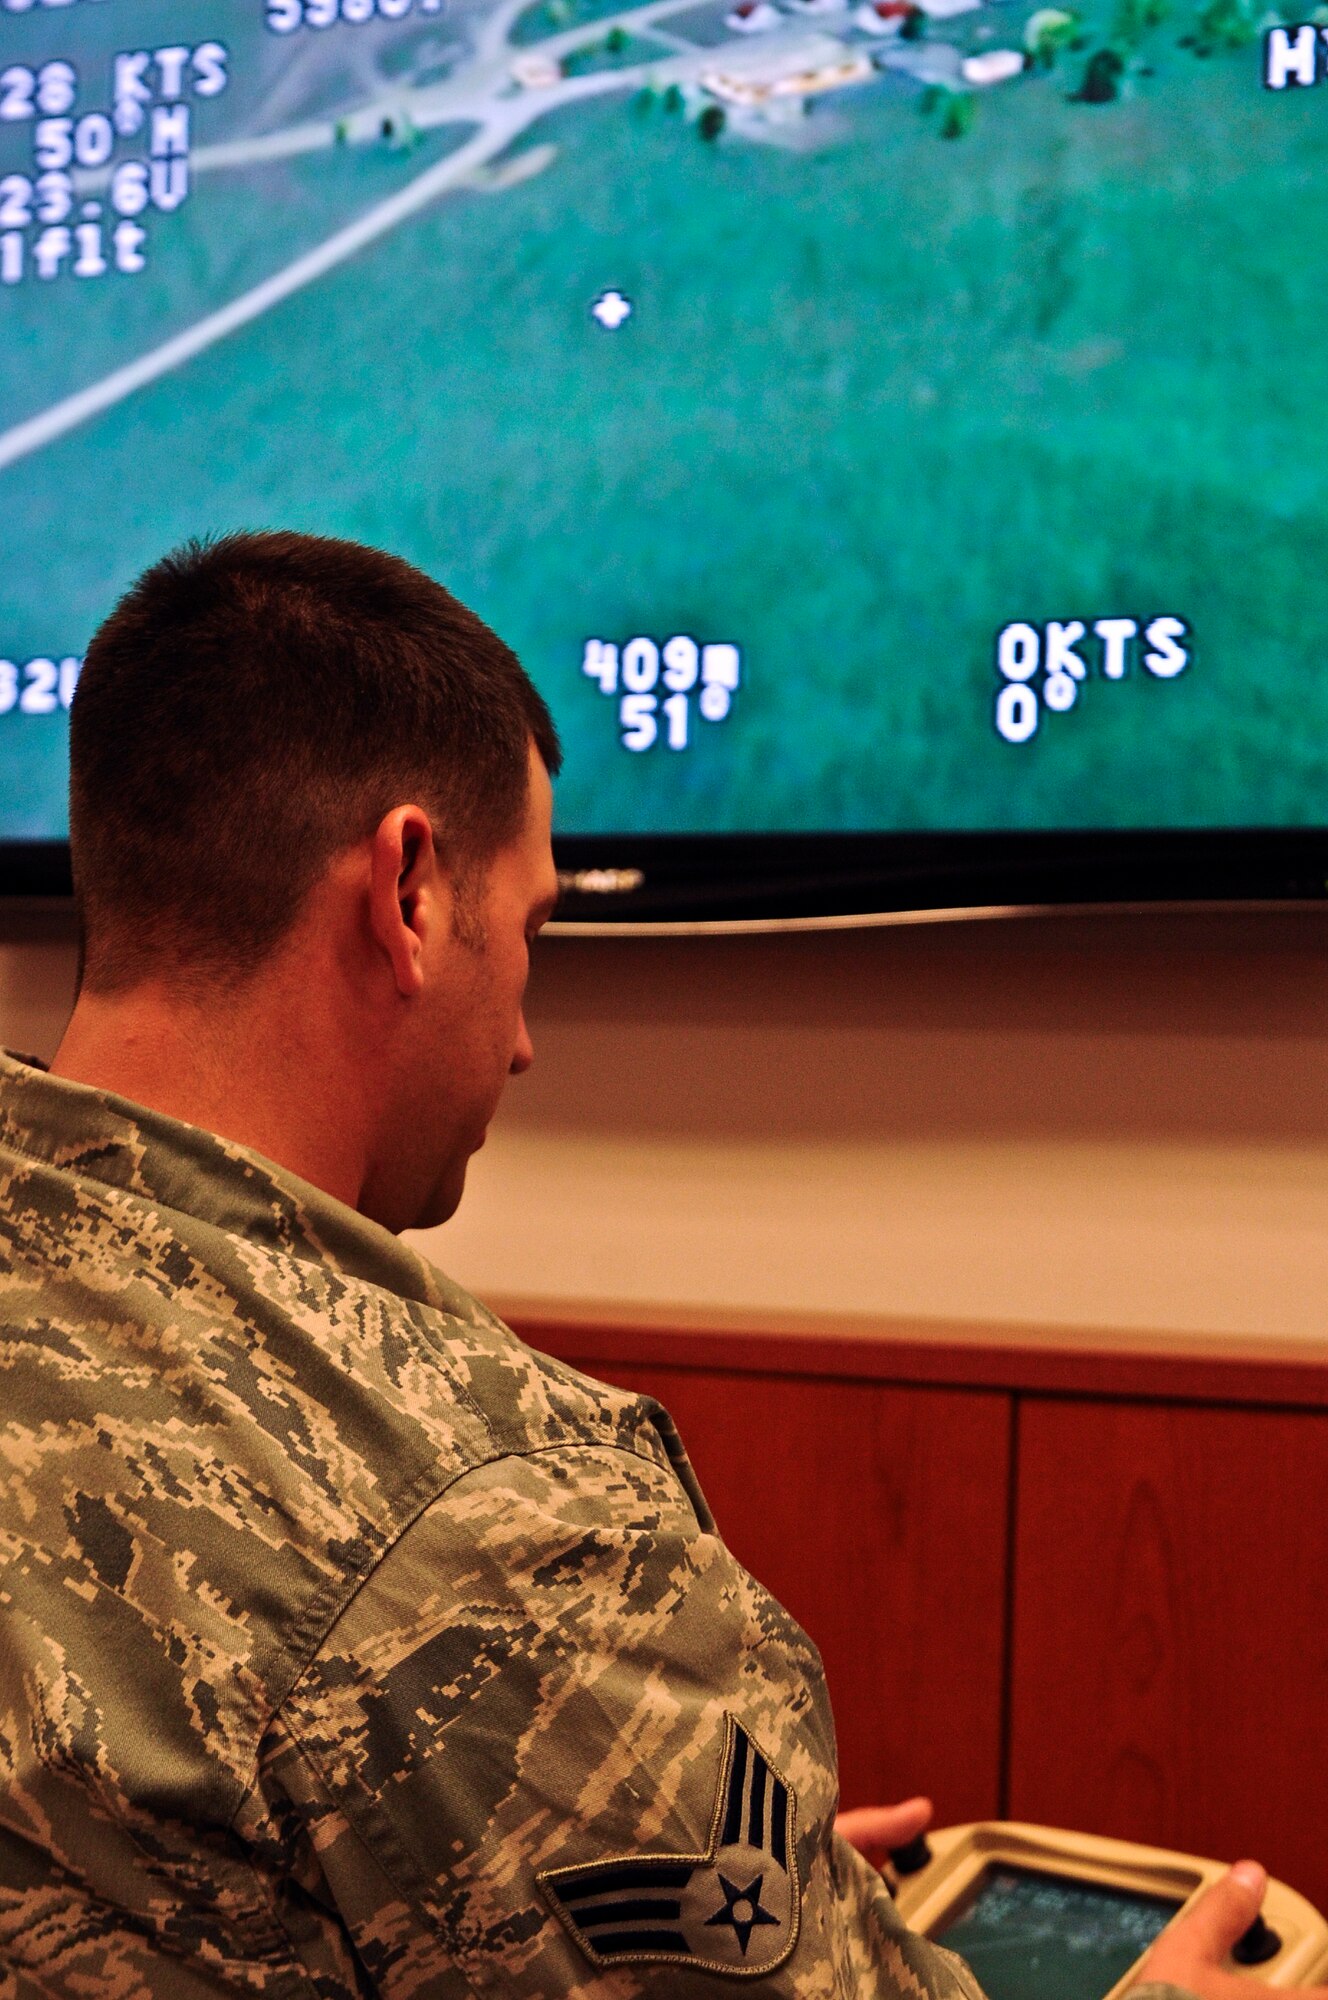 Senior Airman Andrew Goffeney, 1st Special Operations Security Forces Squadron combat arms journeyman, practices using a small unmanned aerial system simulator in a unit training room at Hurlburt Field, Fla., March 4, 2014. Goffeney completed the simulator training to practice navigating the RQ-11B Raven. (U.S. Air Force photo/Senior Airman Michelle Patten)

